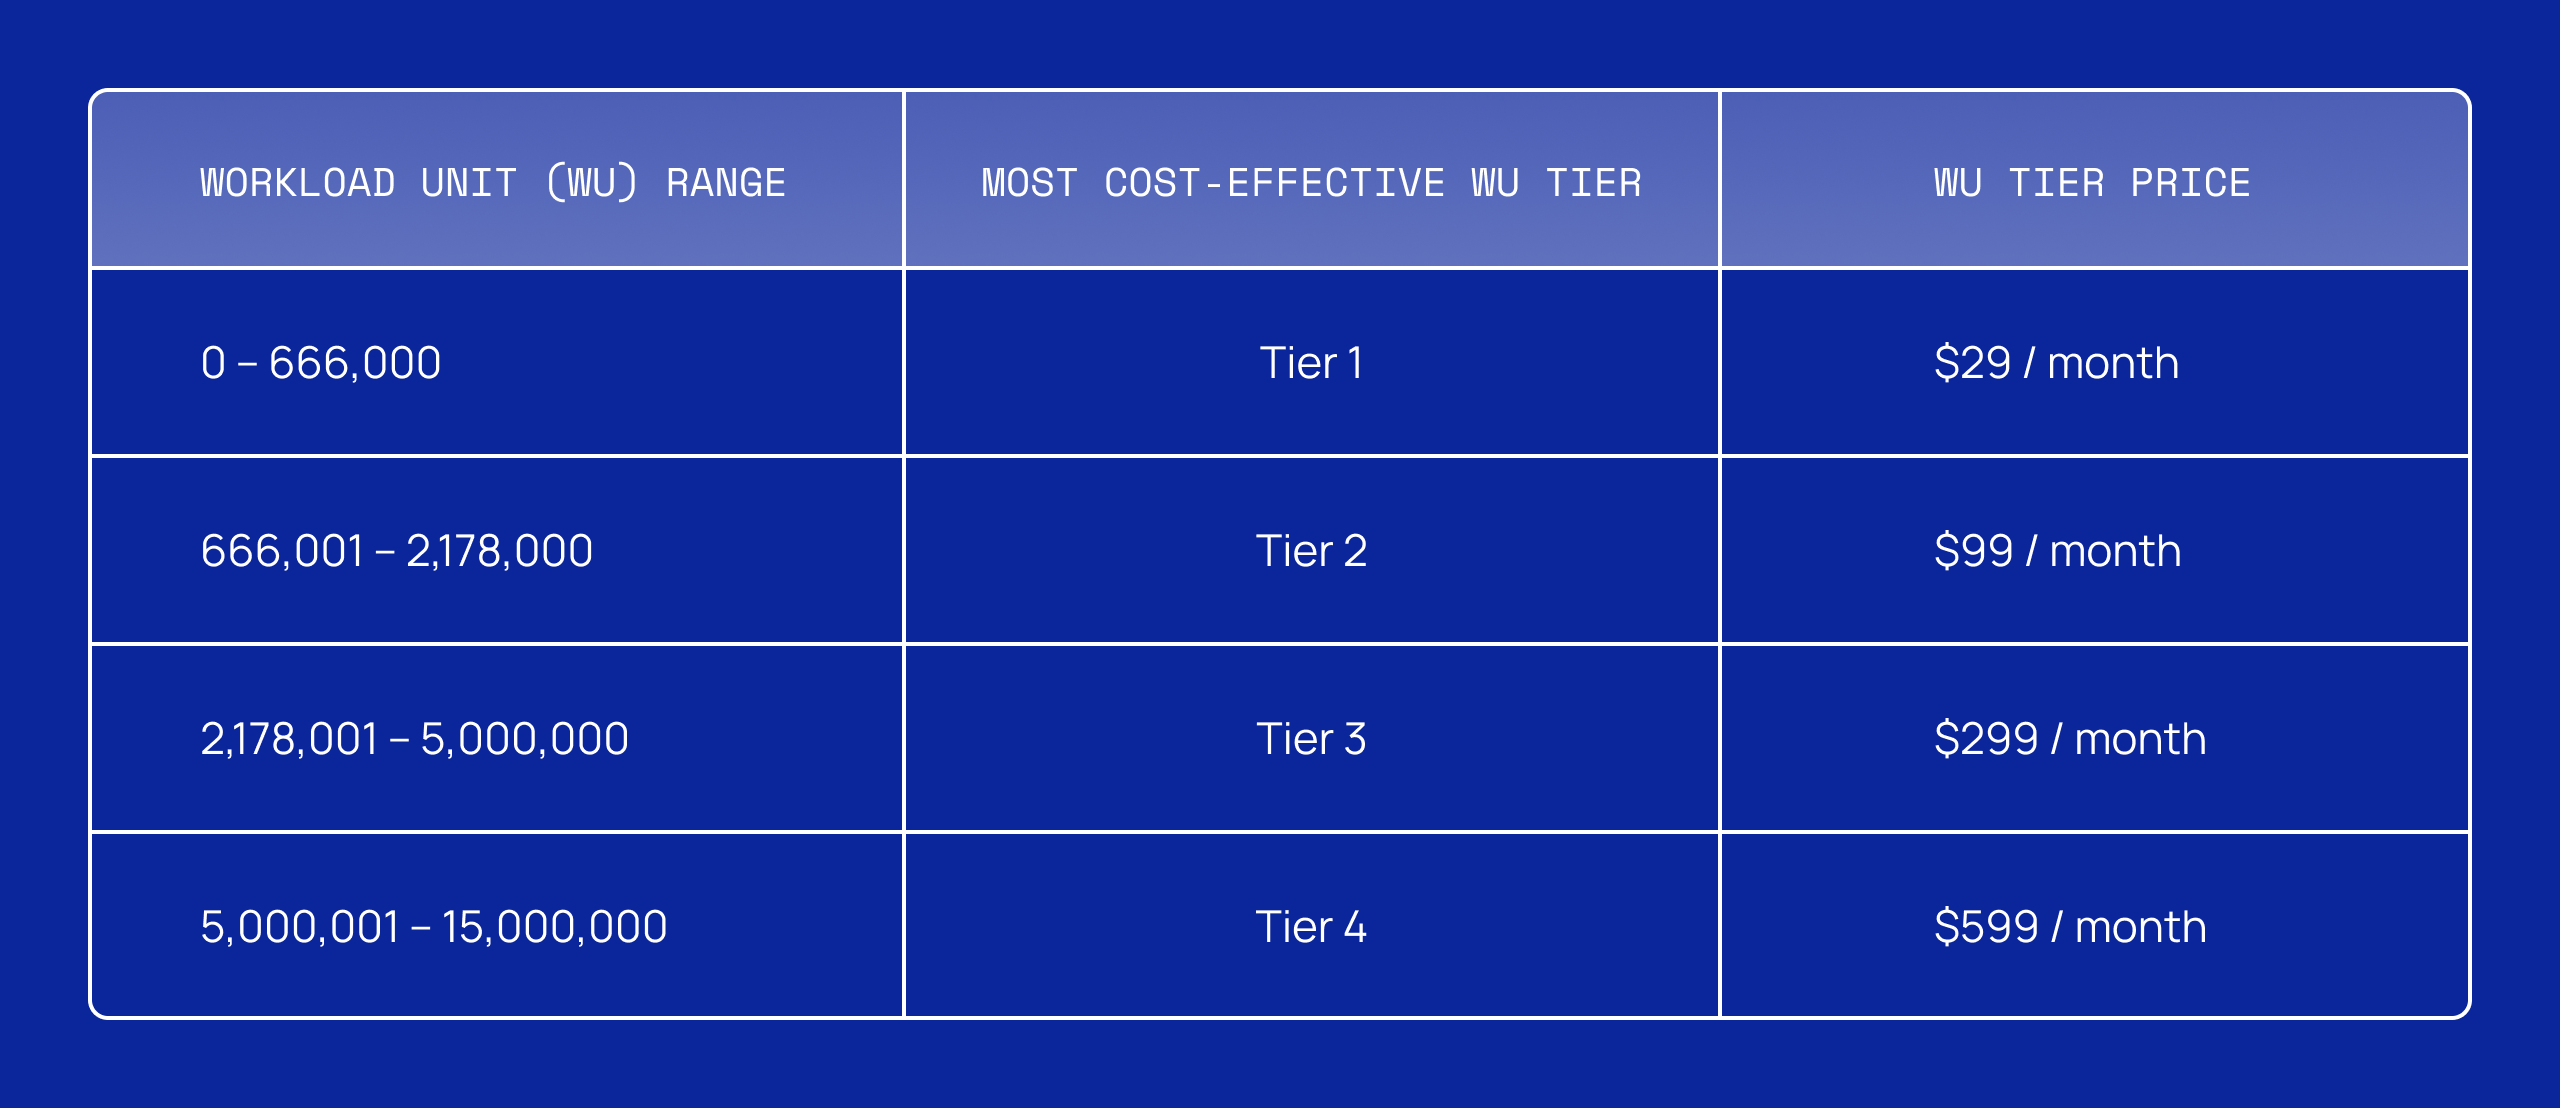 A table displaying the most cost-effective workload tiers by amount of WU needed